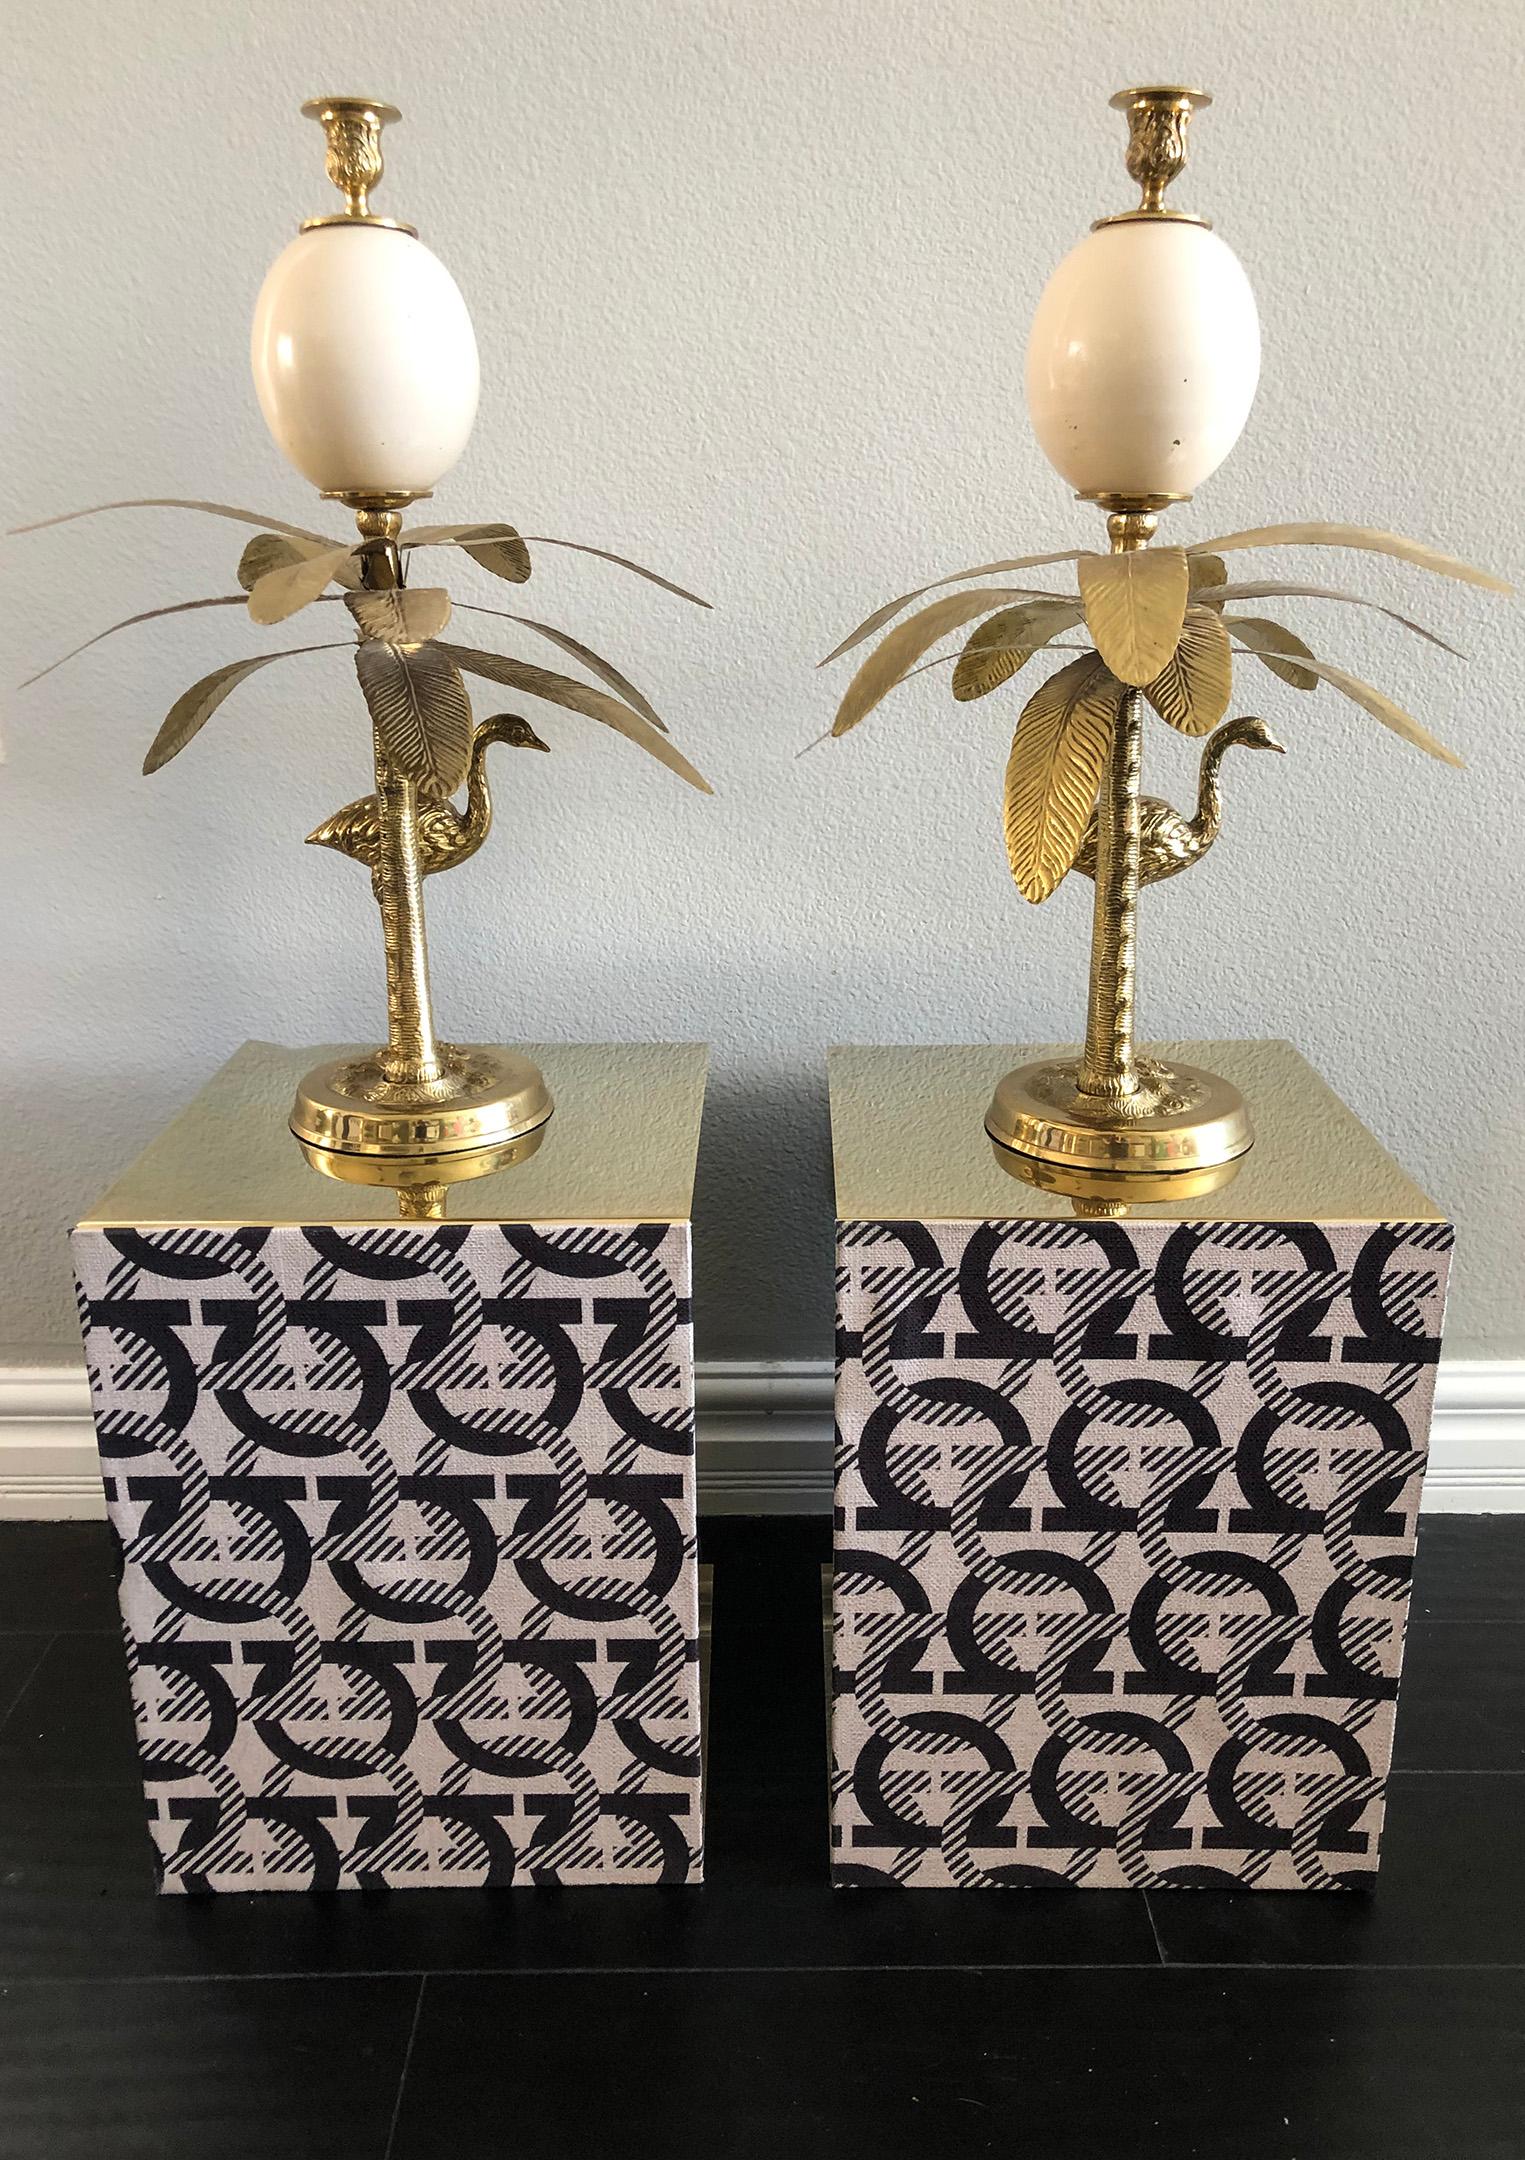 This pair of stunning Hollywood Regency style candlestick holders in brass are quite substantial and will surely be a conversation piece in any home. Cast in solid brass, these candlestick holders feature an enameled brass 